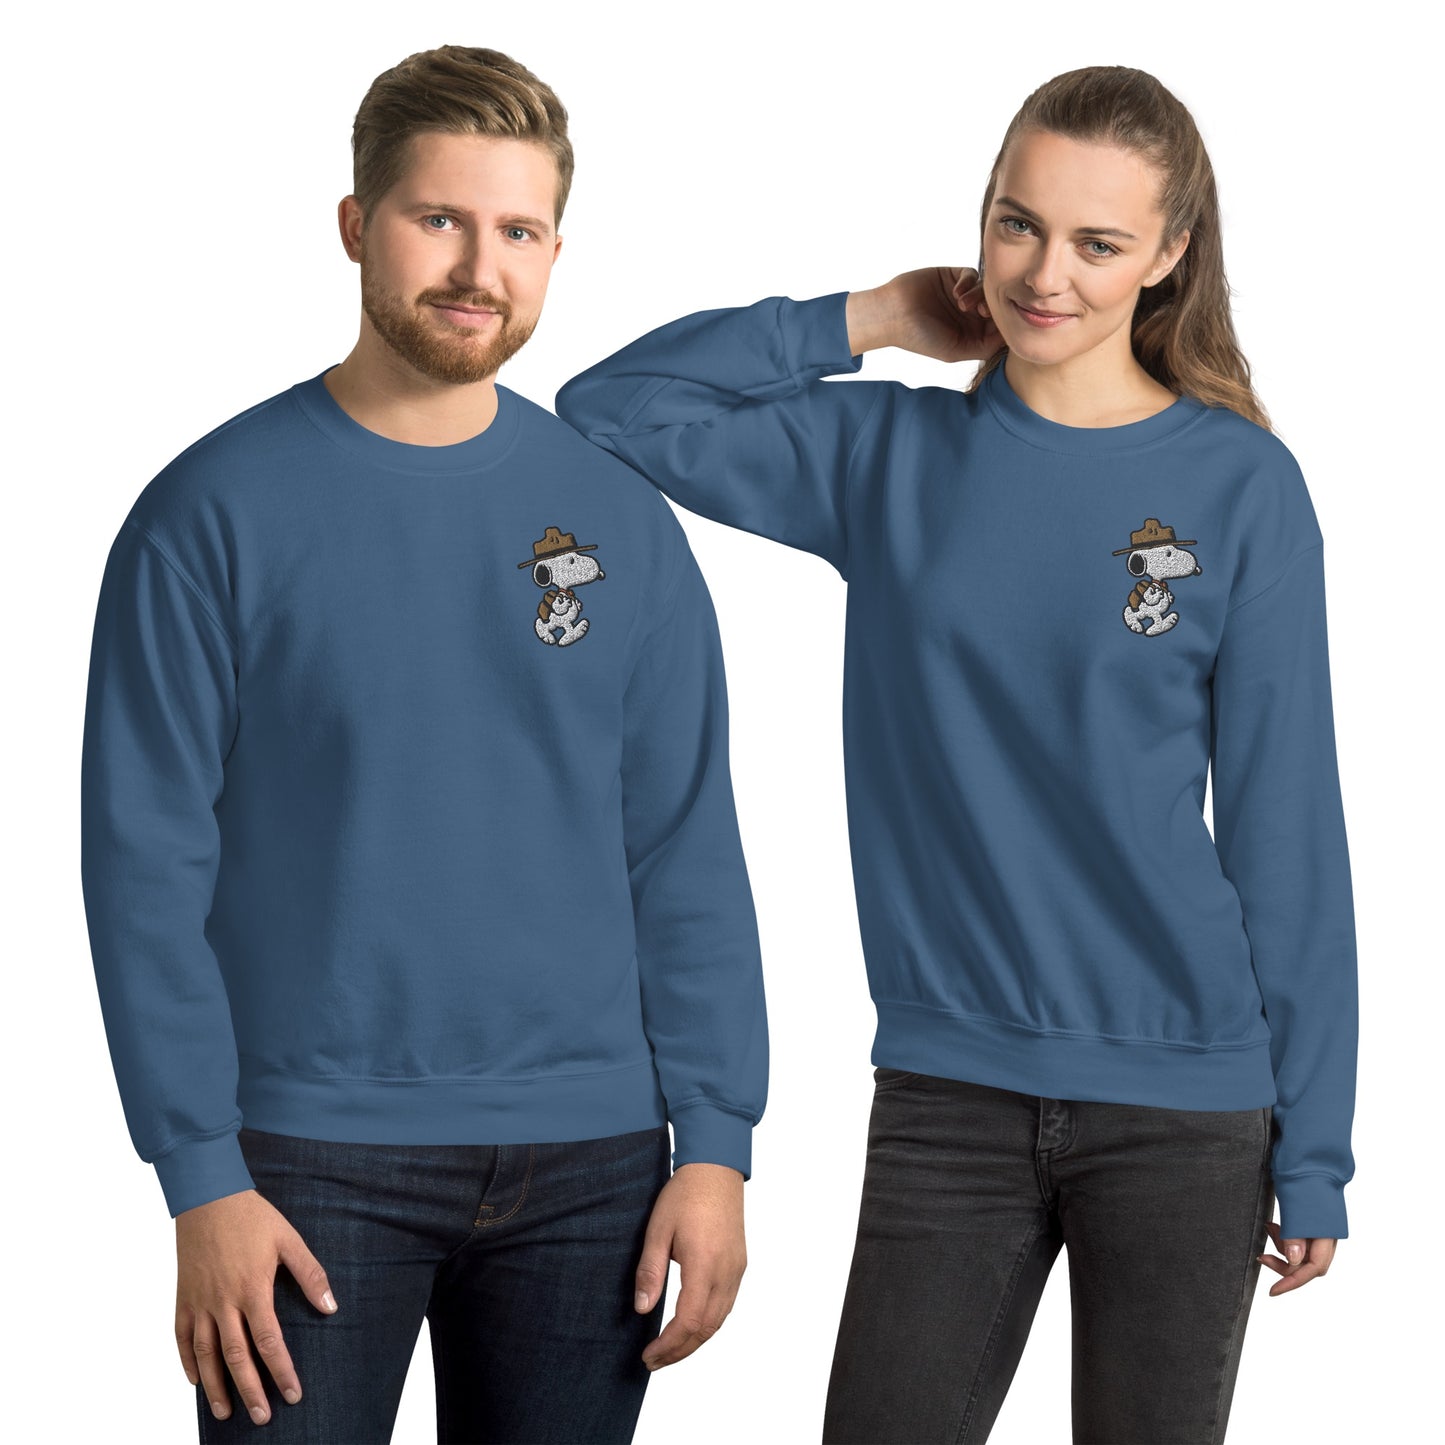 Snoopy Beagle Scouts Embroidered Adult Crewneck